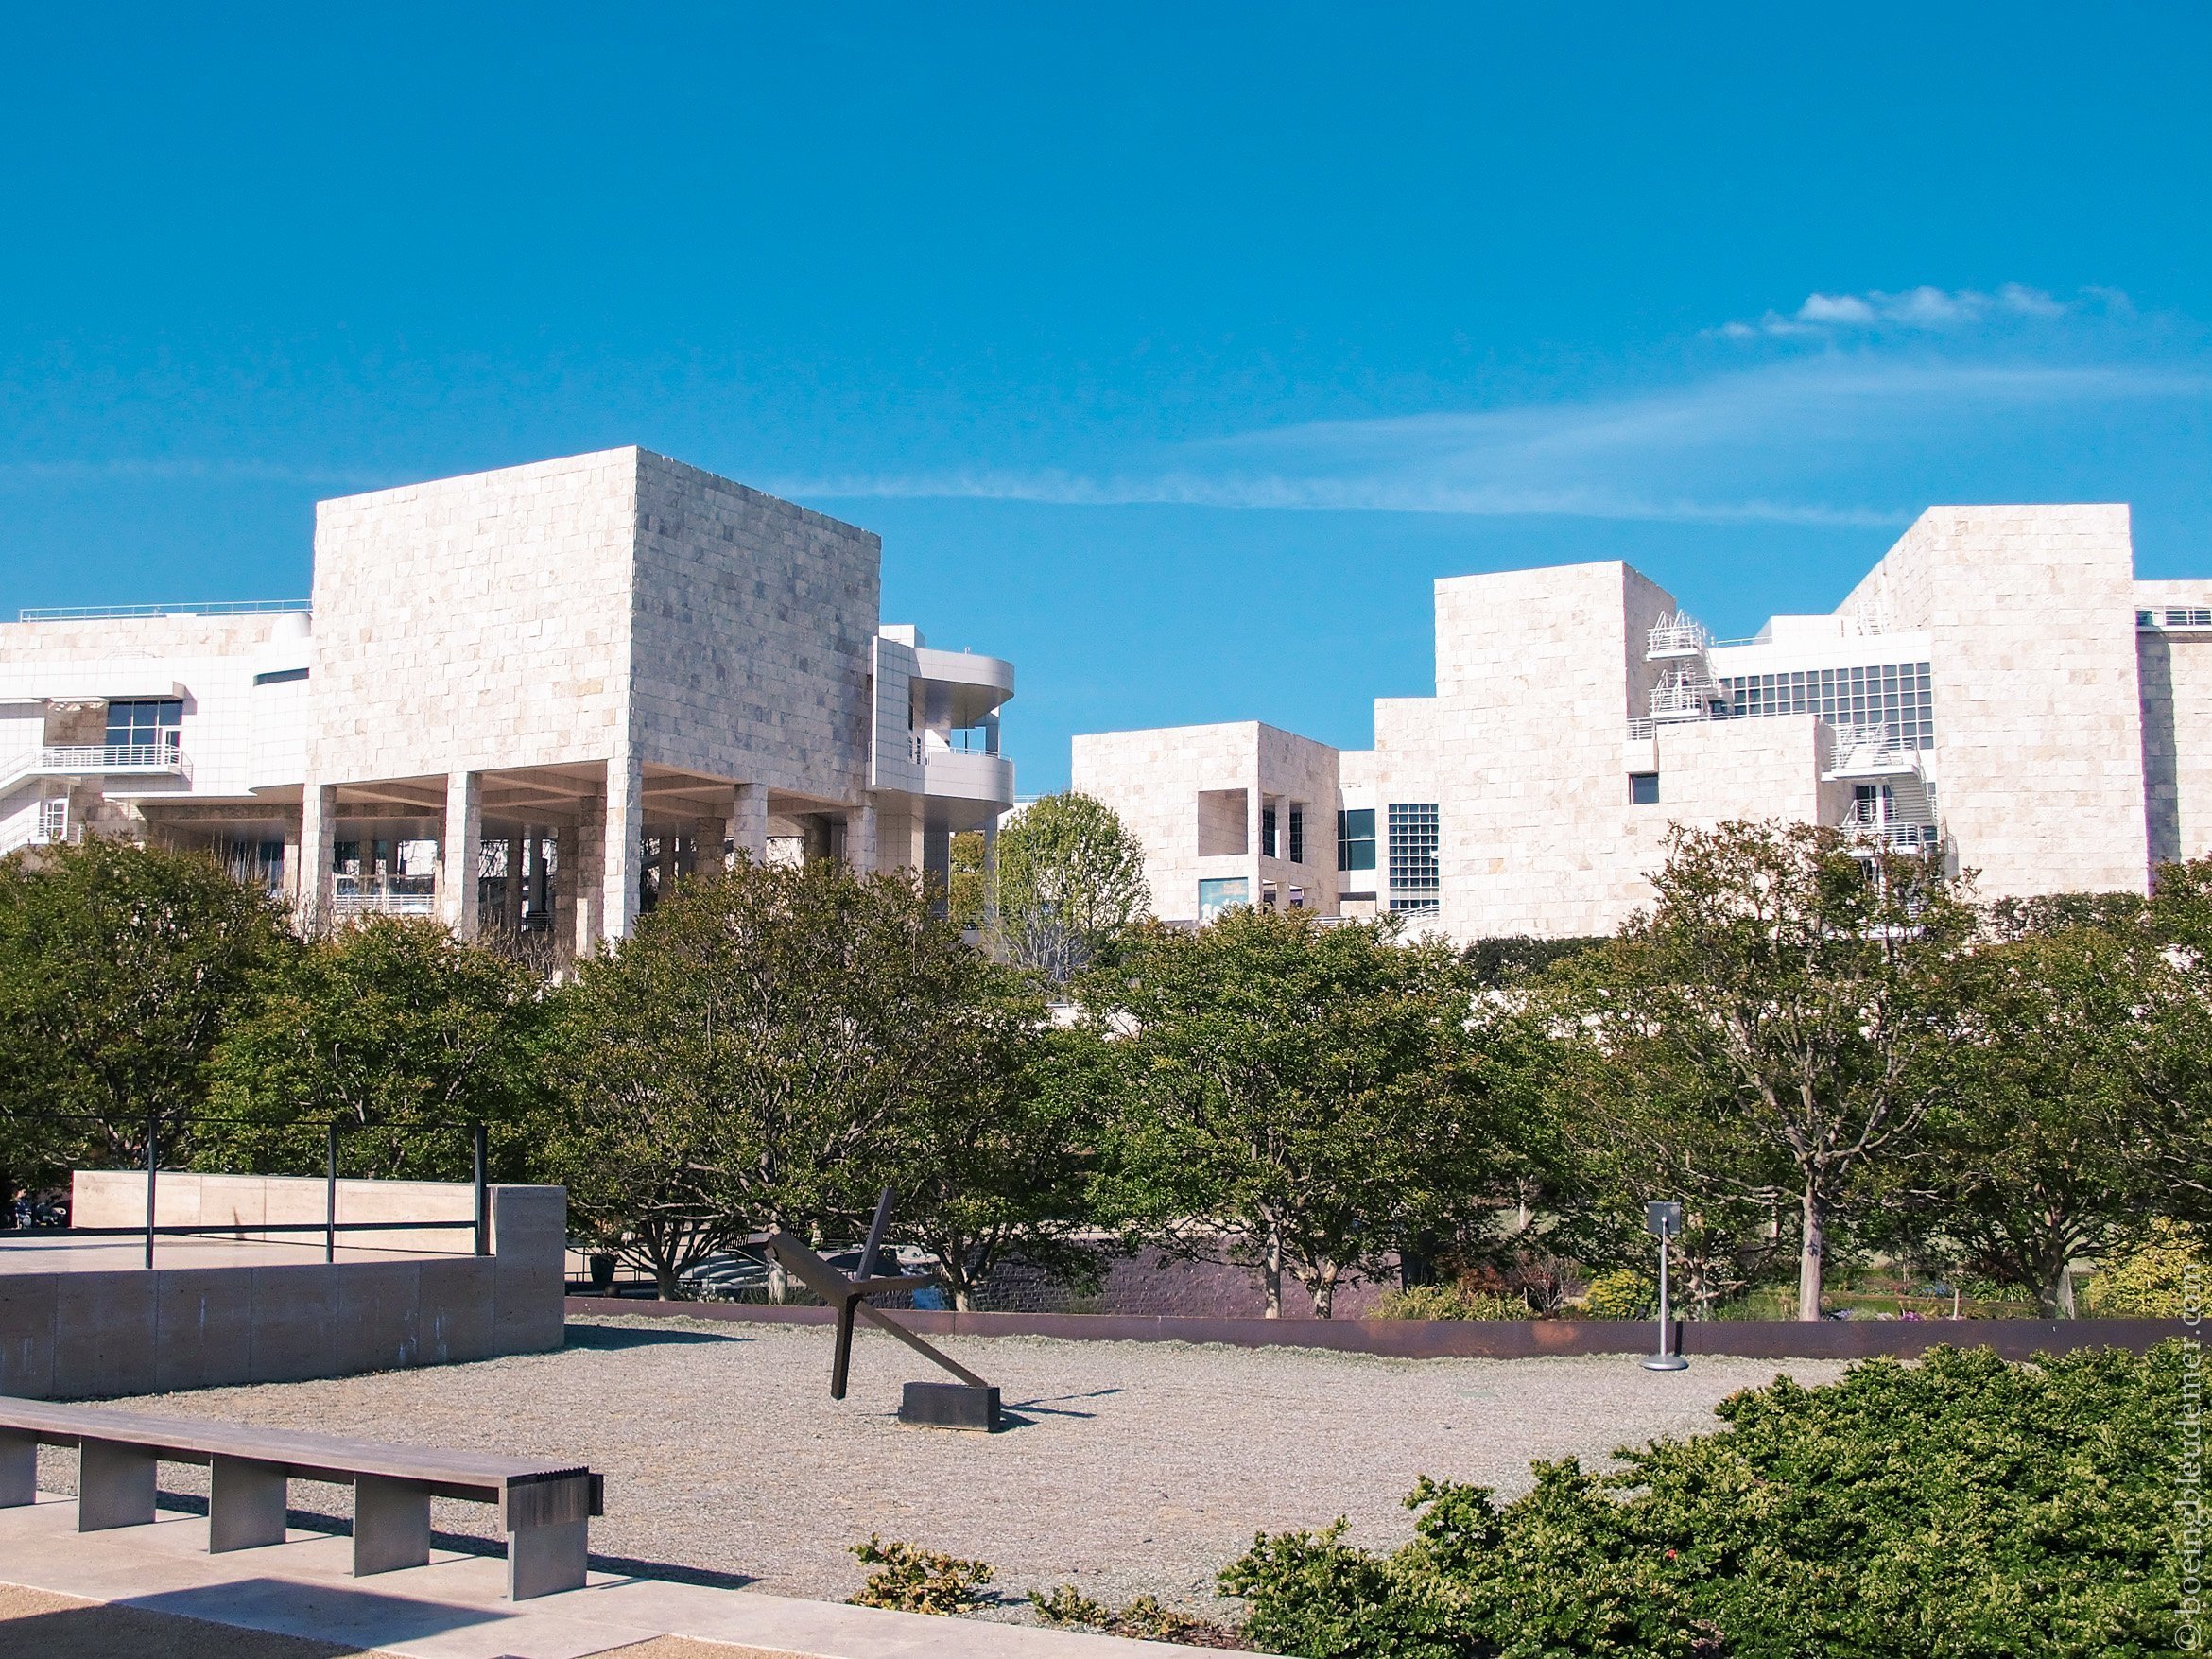 The Paul J. Getty Center a museum in Los Angeles, USA.